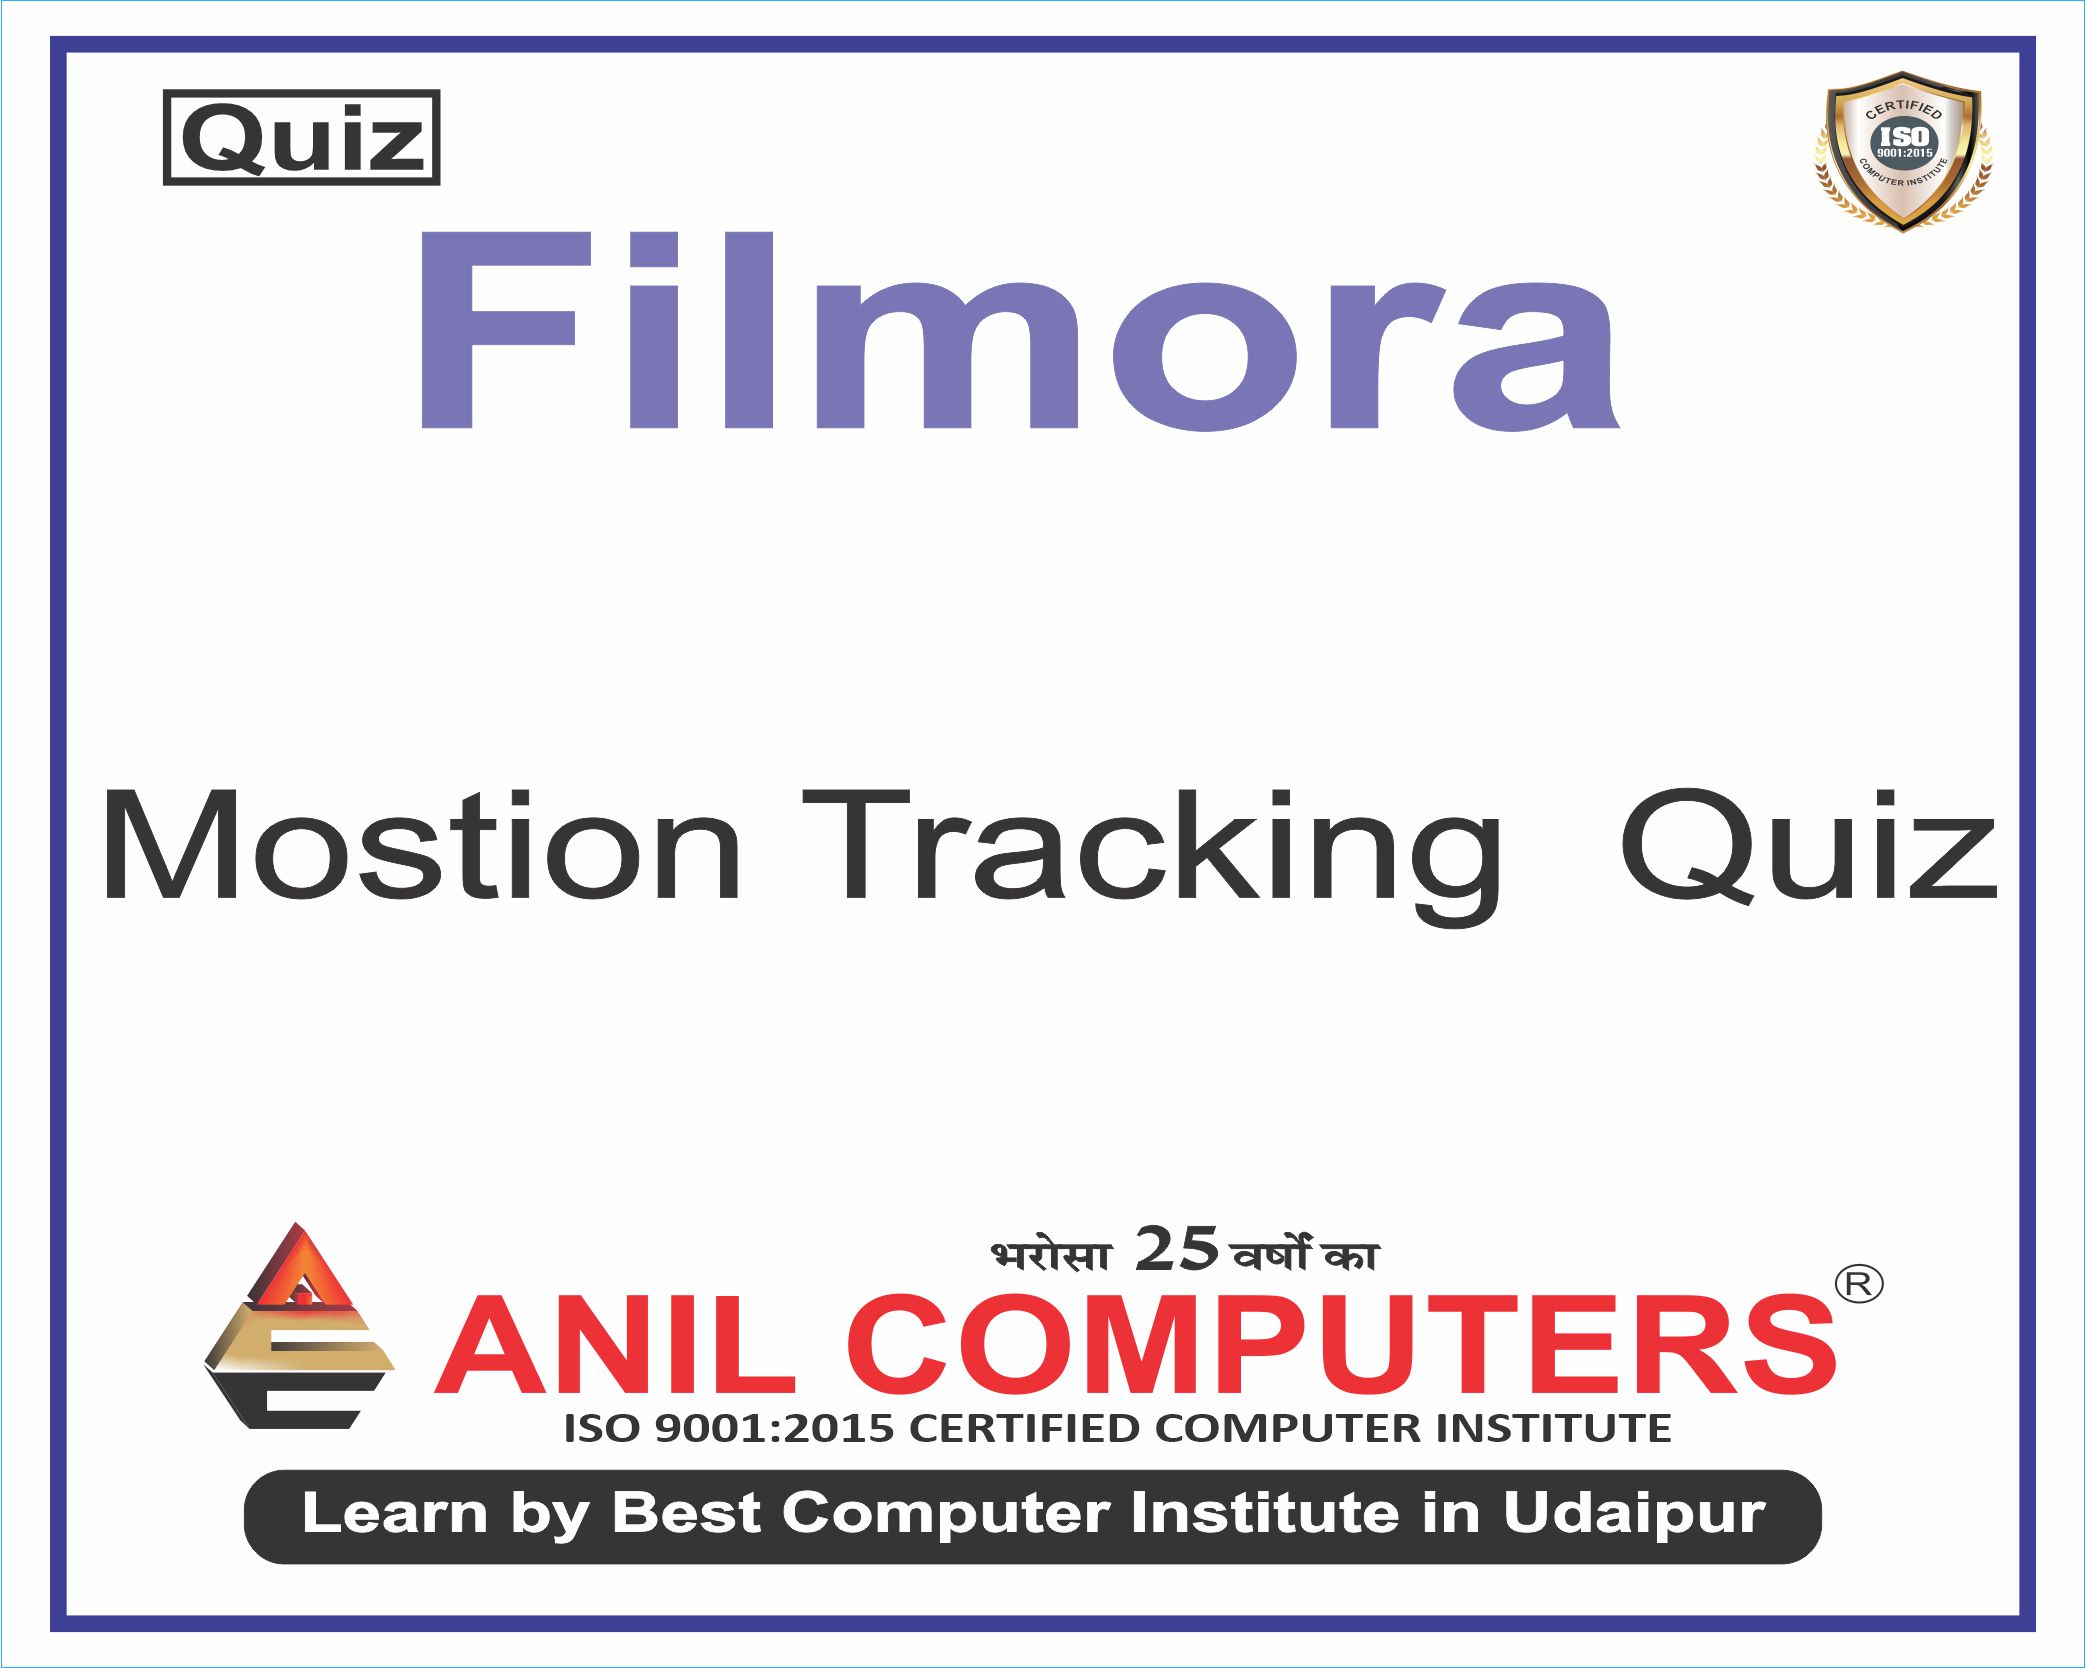 Mostion Tracking Quiz